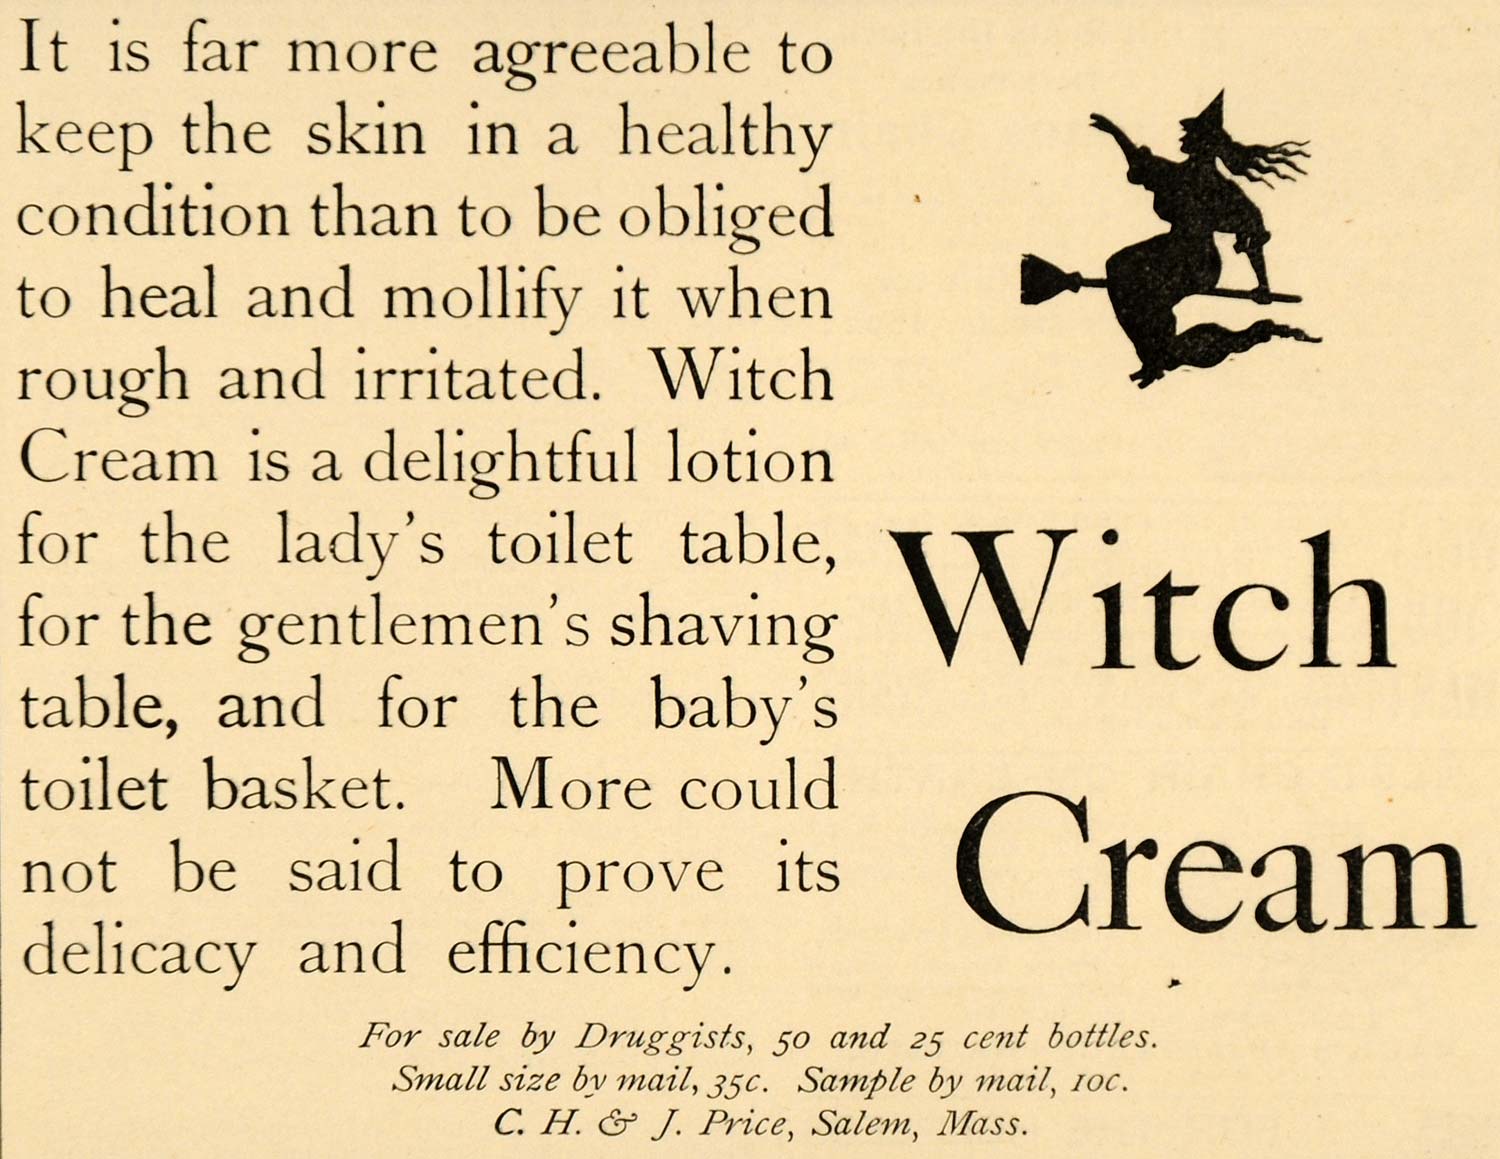 1892 Ad C. H. & J. Price Witch Beauty Cream Toiletry - ORIGINAL ADVERTISING LHJ4